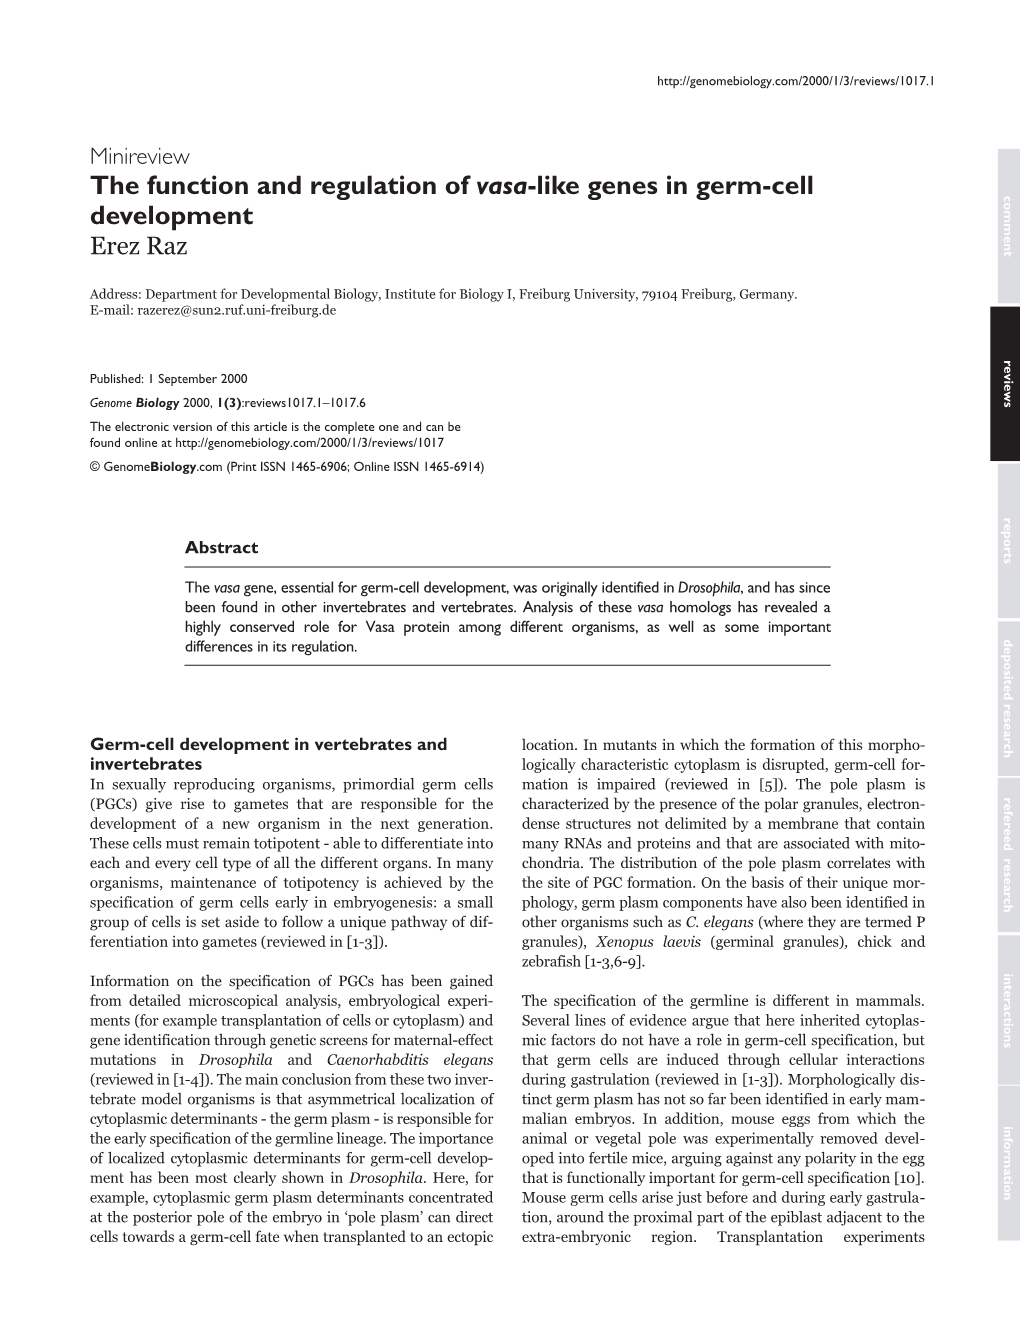 The Function and Regulation of Vasa-Like Genes in Germ-Cell C O M Development M E N